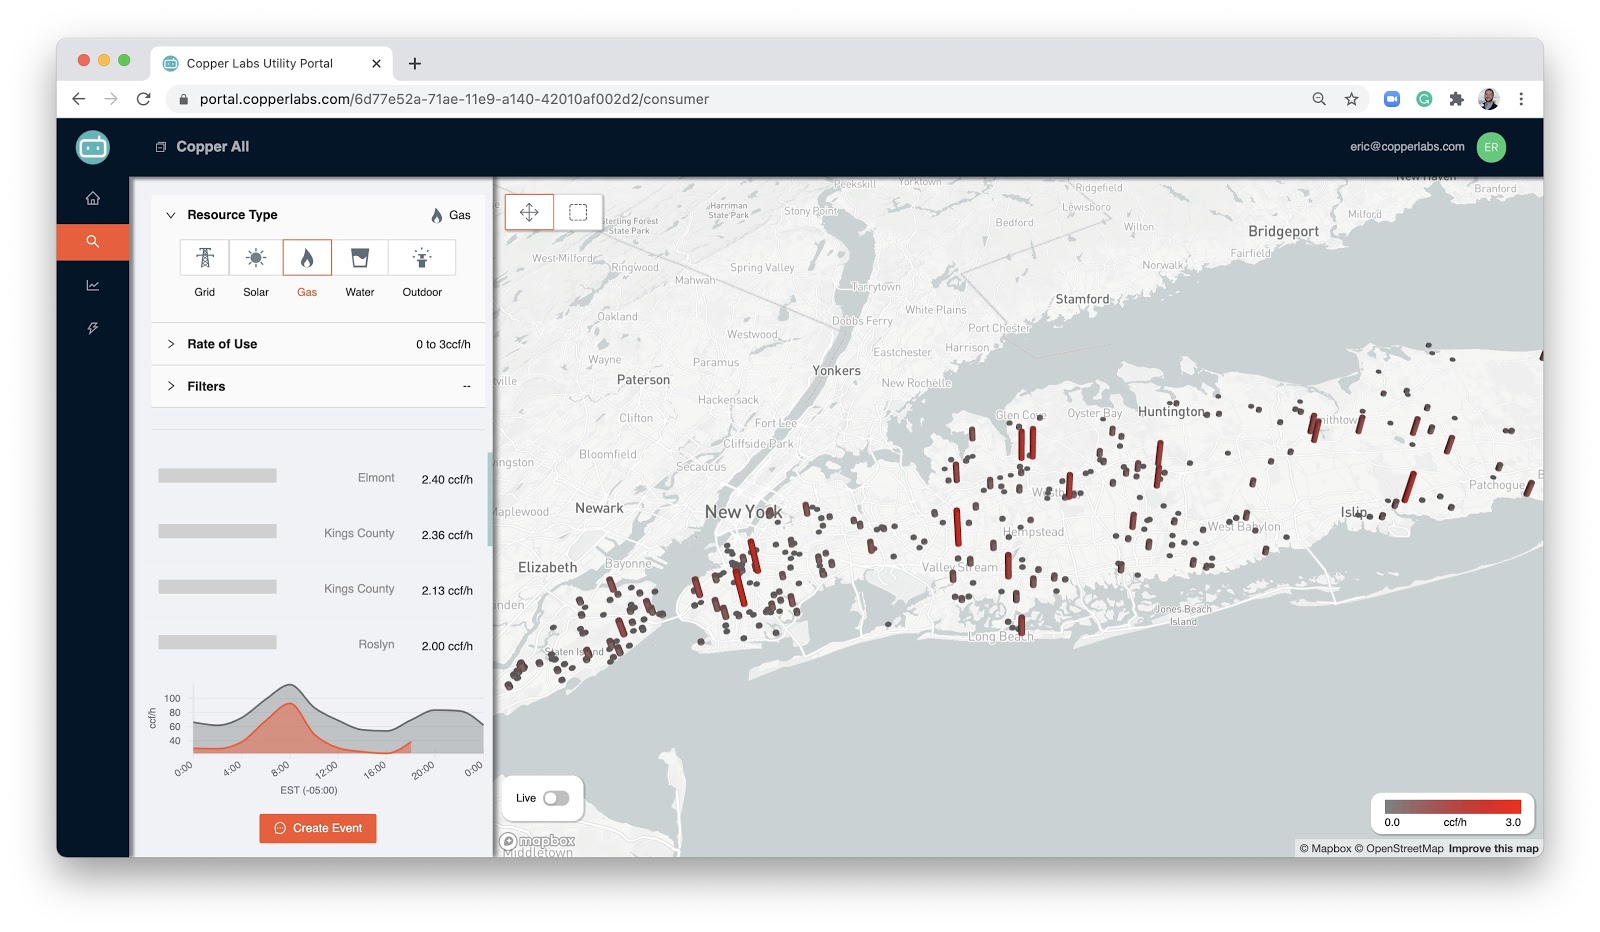 Copper Labs Utility Portal website showing energy usage in New York state.